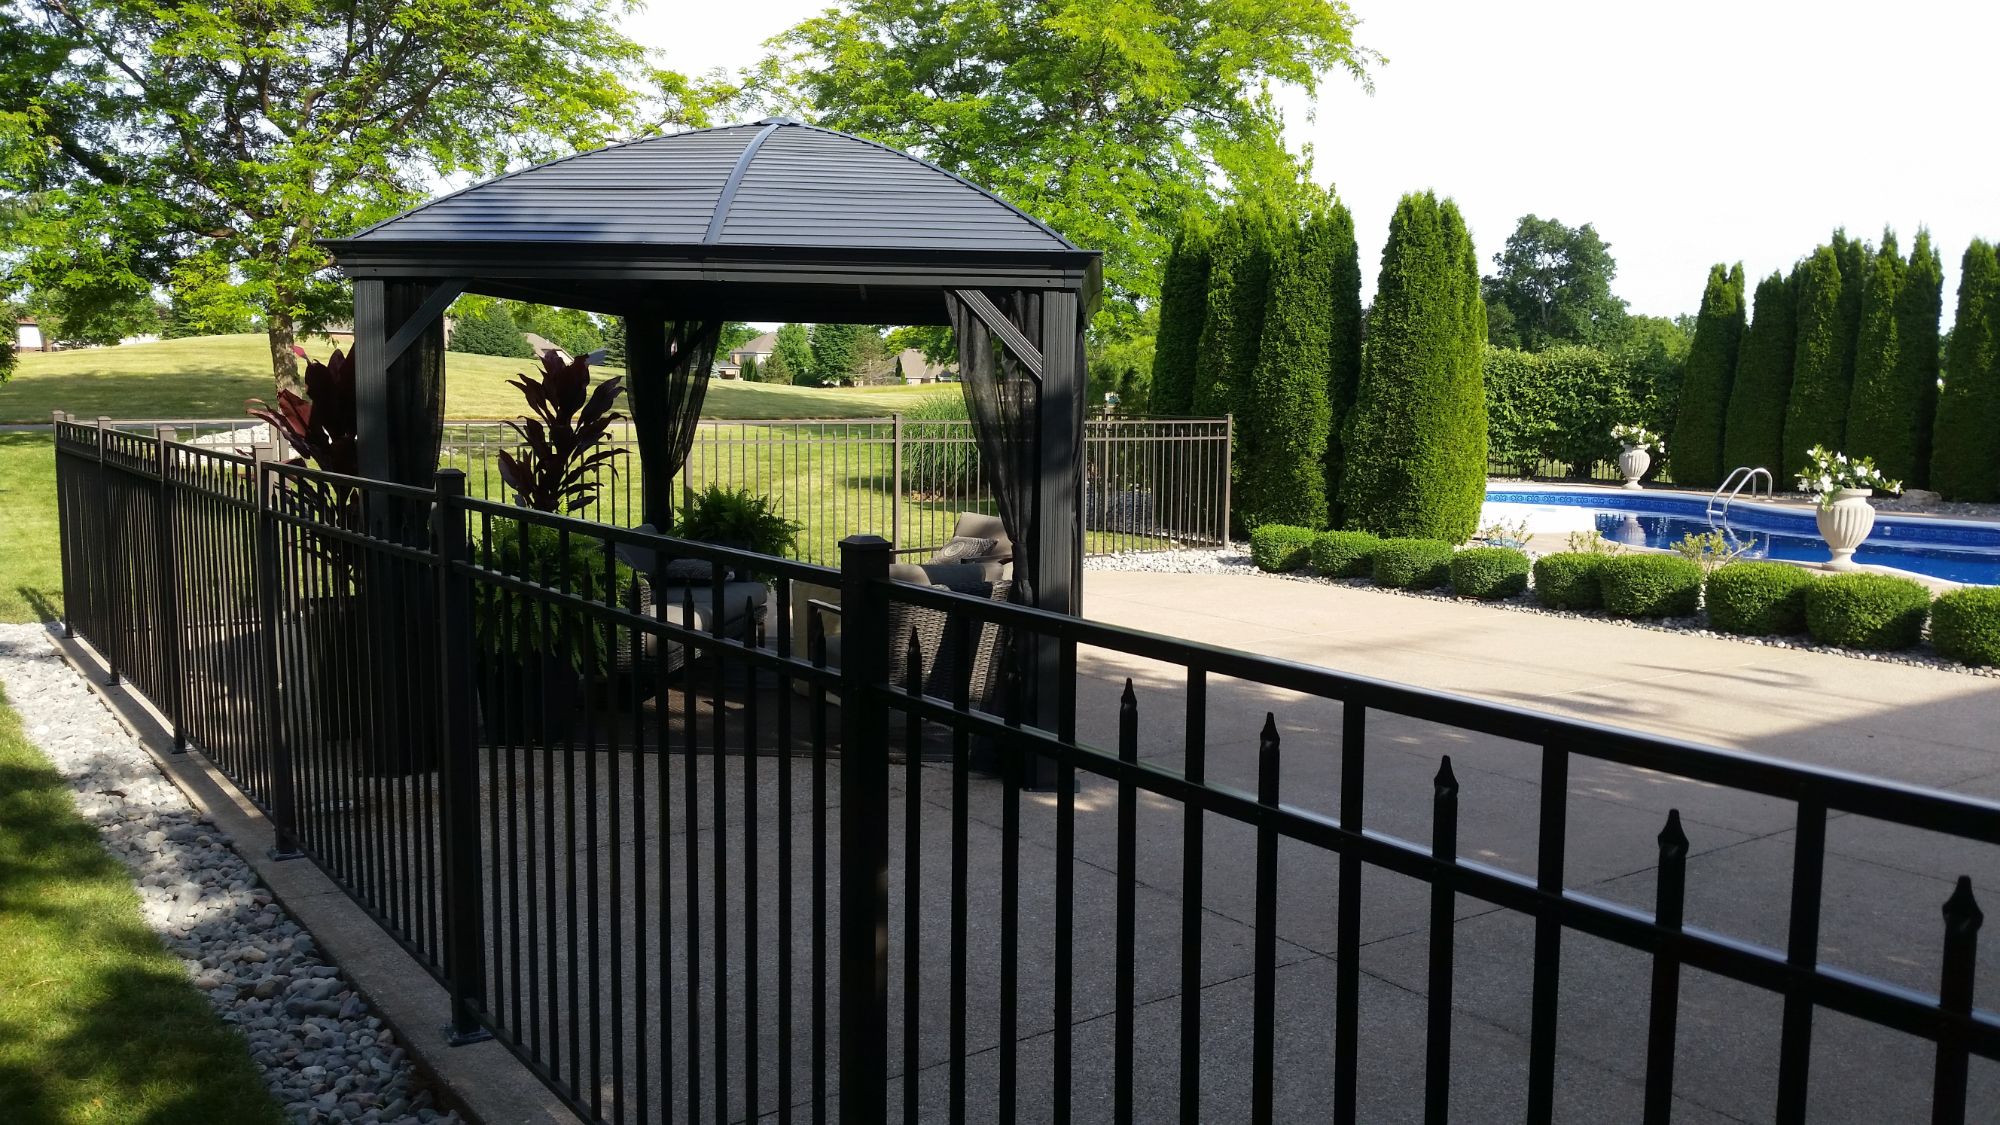 Royal Aluminum Fence that we expanded to turn this basketball court into part of the entertaining area in the back yard near Point west Golf Course.